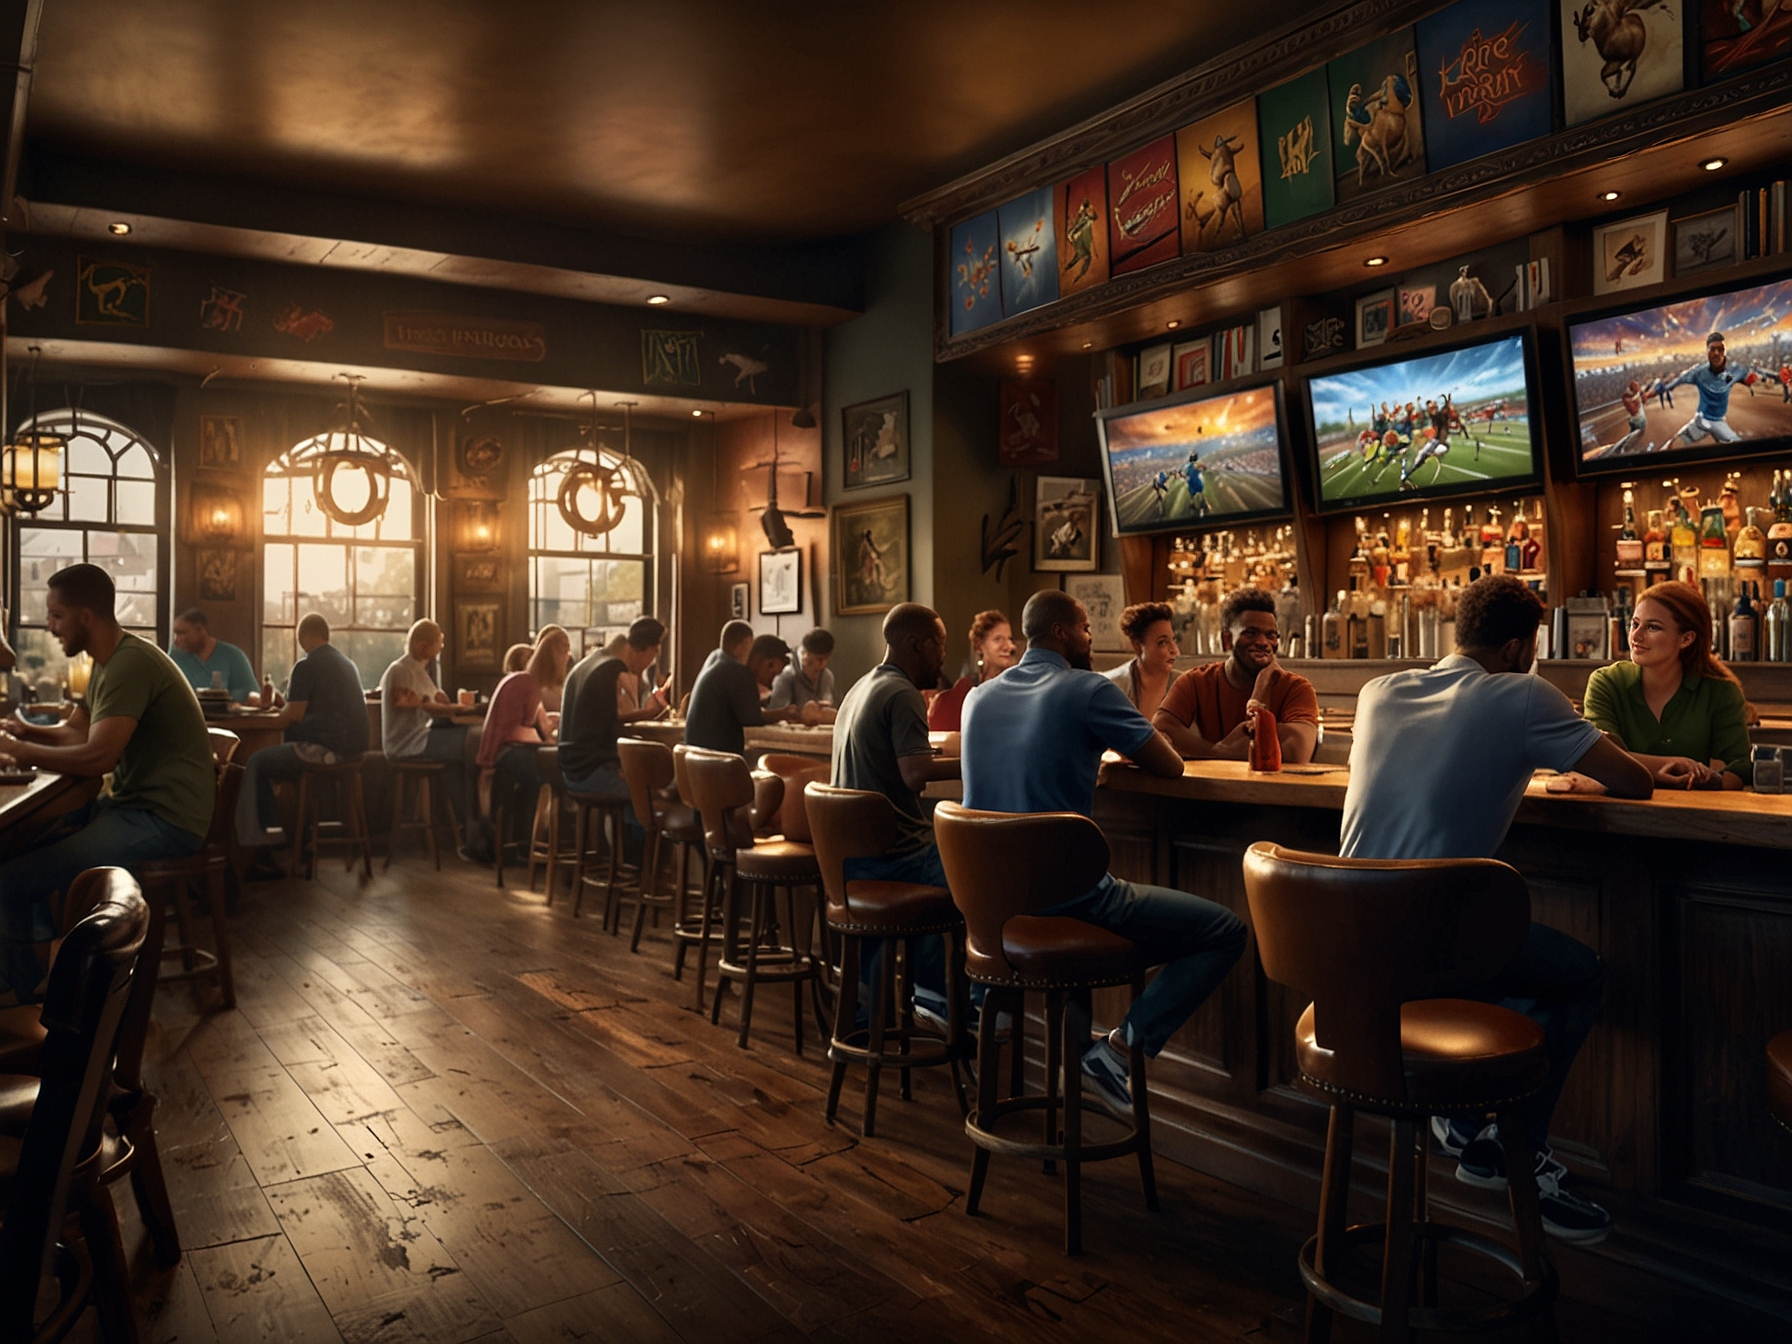 An image showcasing an energetic scene inside The Famous Three Kings sports bar in West Kensington, filled with excited football fans, numerous big screens, and a vibrant atmosphere.